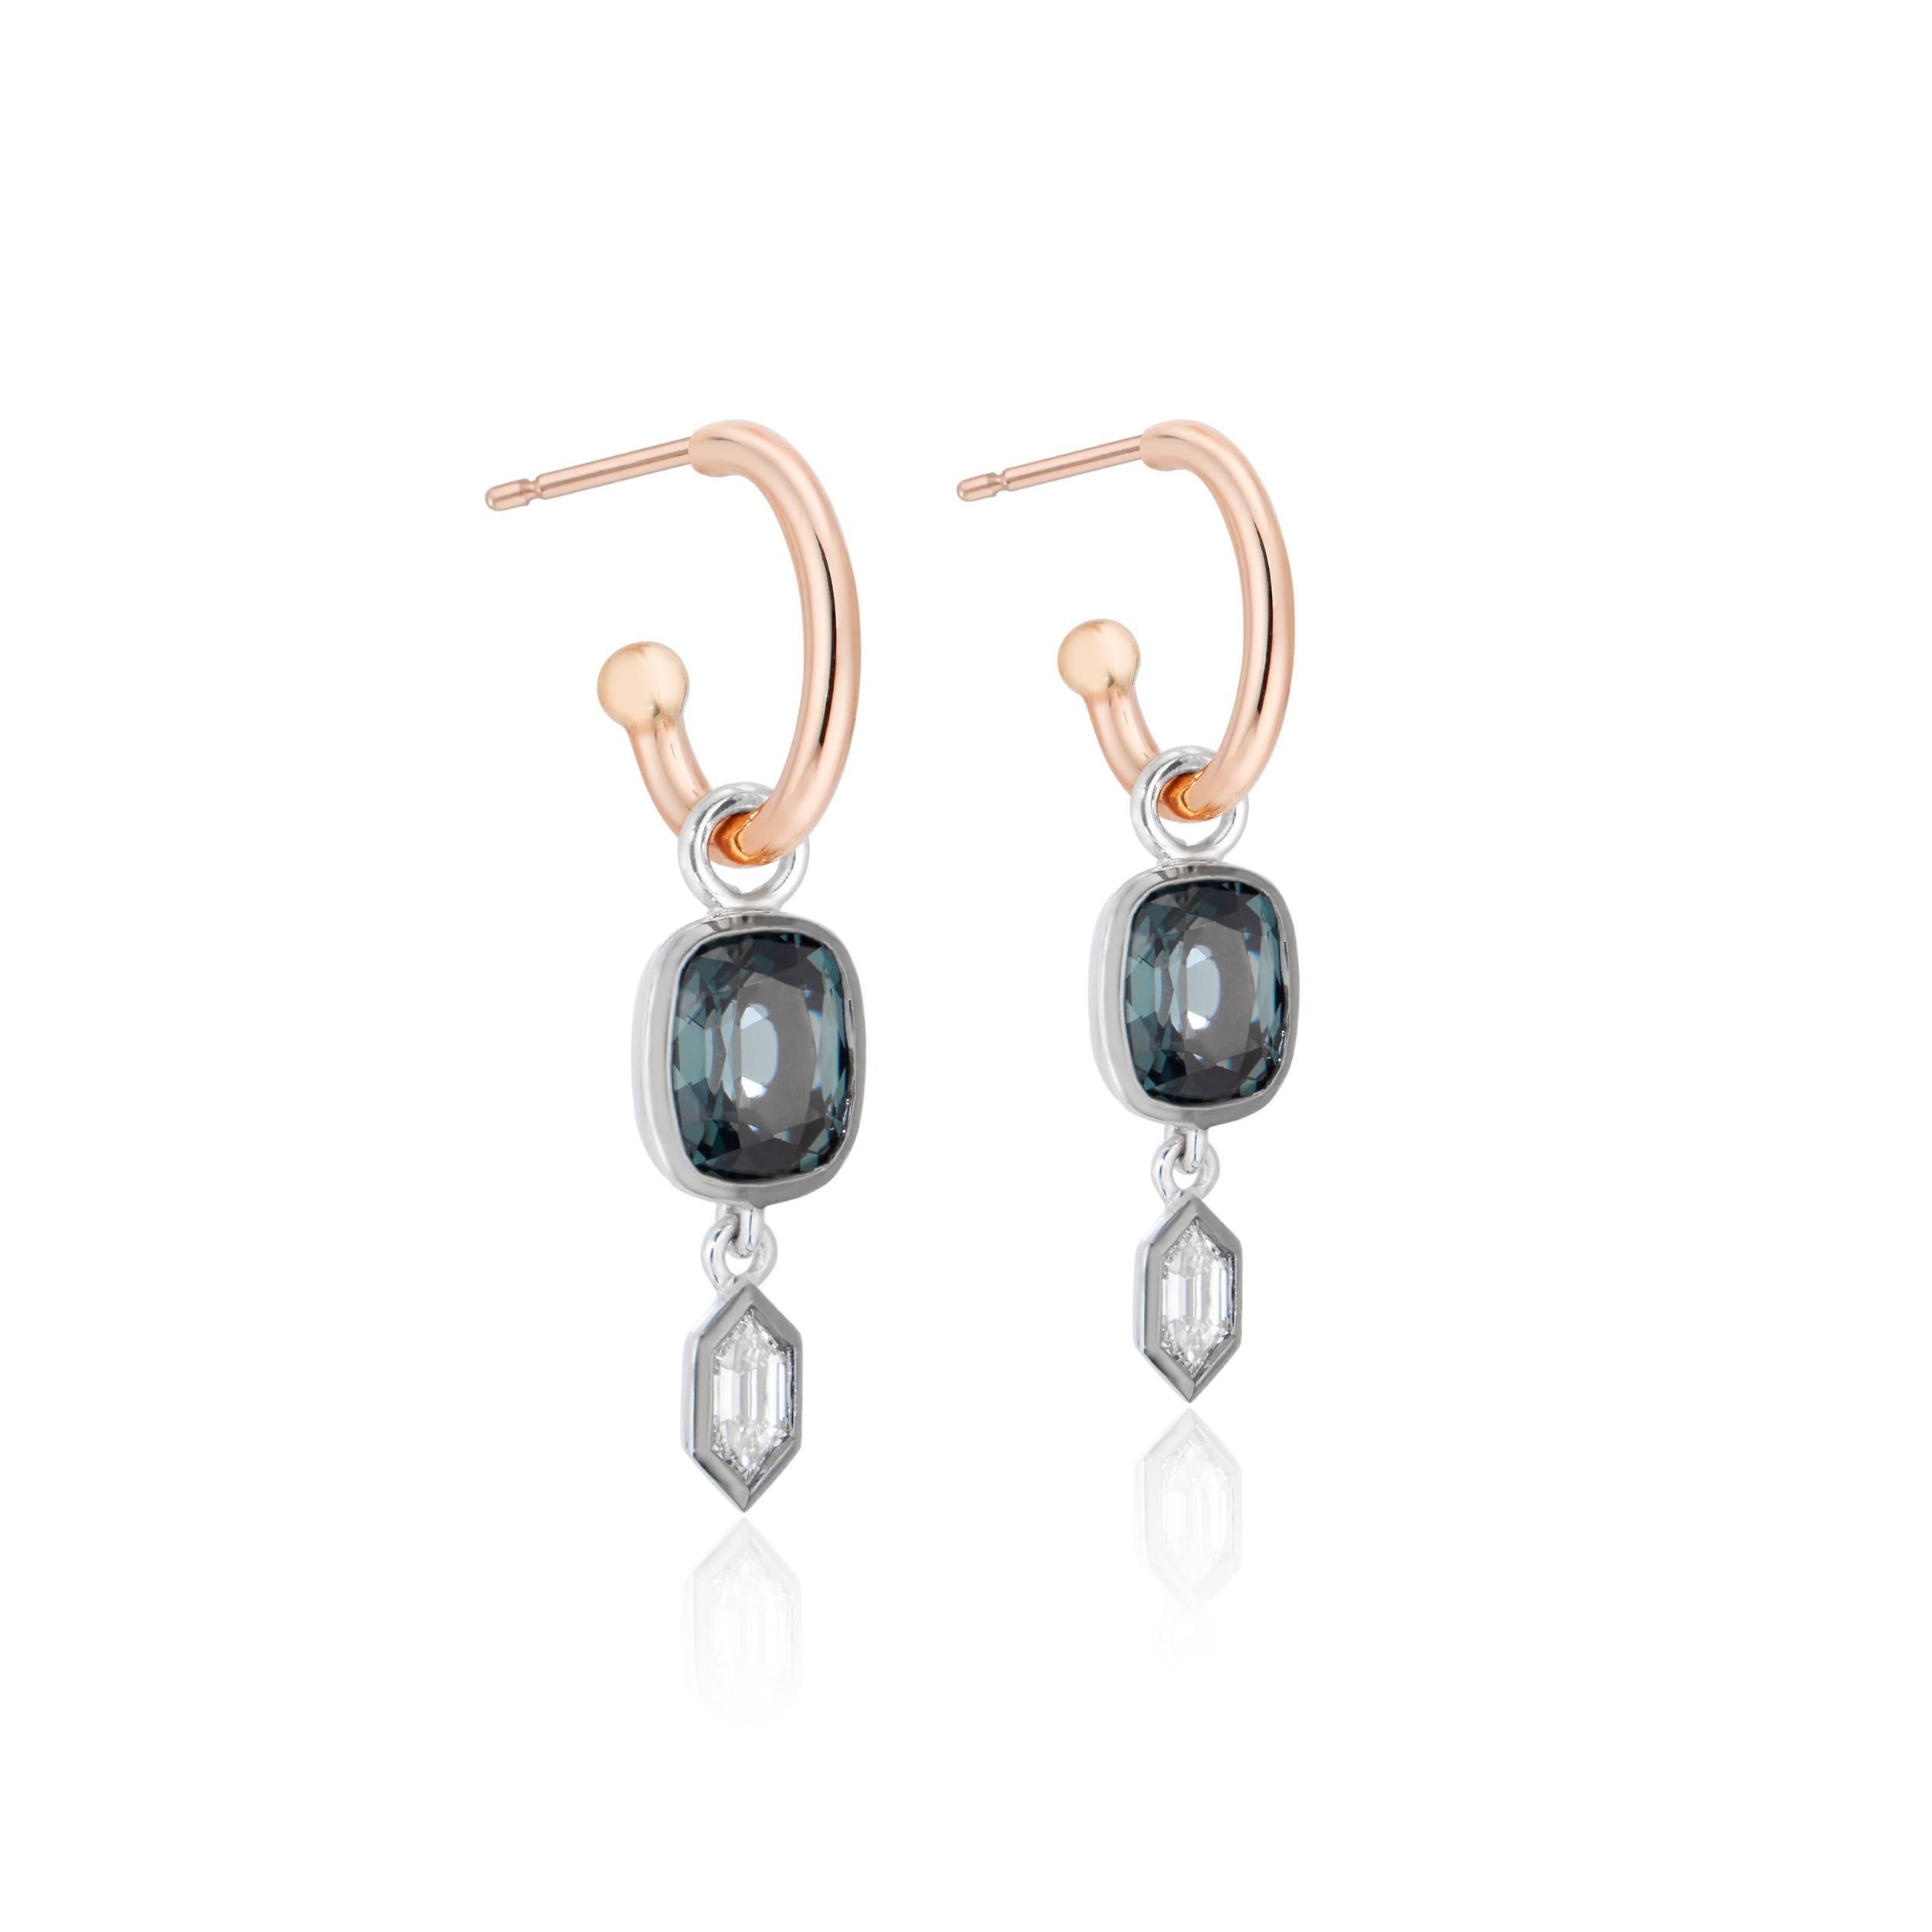 Our signature Esti Hoop Earrings are fun and versatile. You can mix and match hoops, order custom charms, or wear them as pendants.

Each charm contains a cushion-cut teal color Burmese spinel and a hexagon-cut colorless diamond set in an 18K